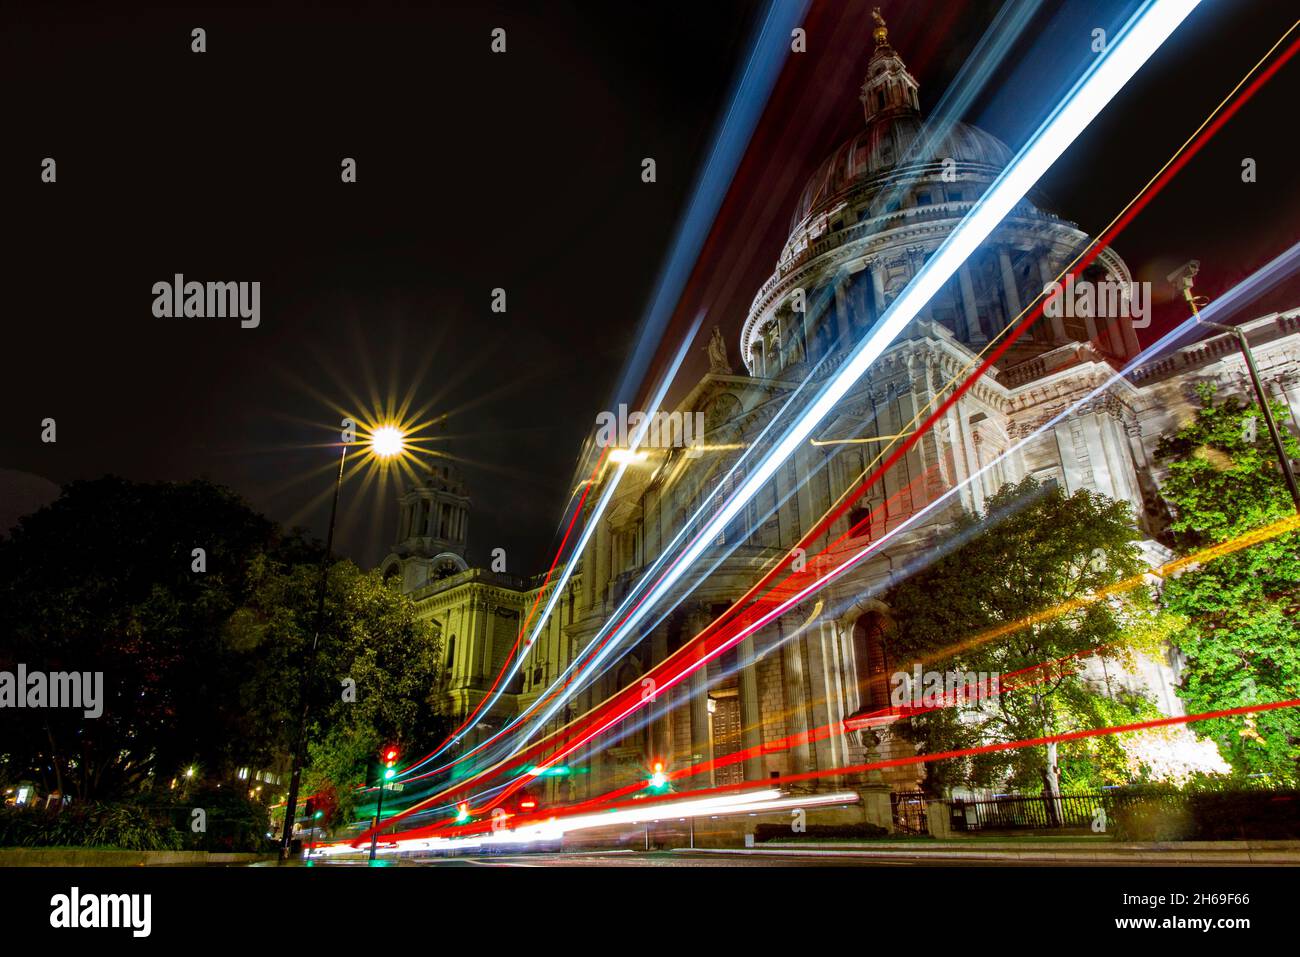 ST PAUL'S CATHEDRAL AT NIGHT WITH BUS LIGHT TRAILS Stock Photo